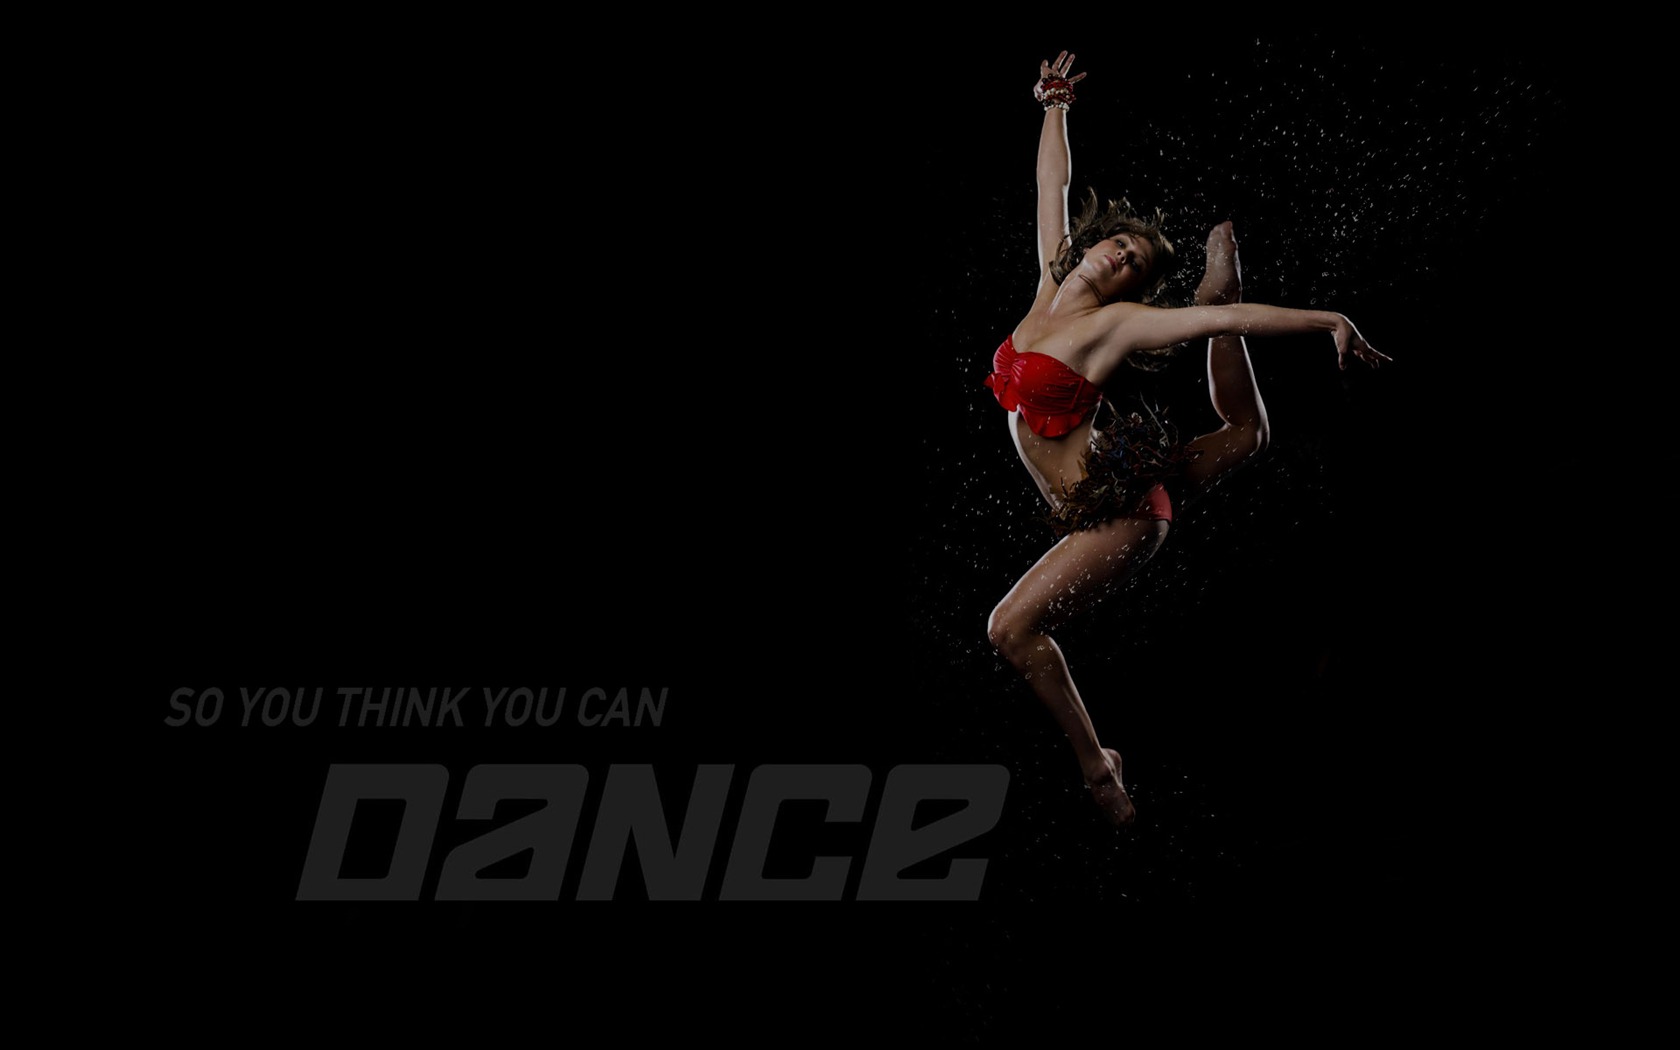 So You Think You Can Dance wallpaper (2) #13 - 1680x1050